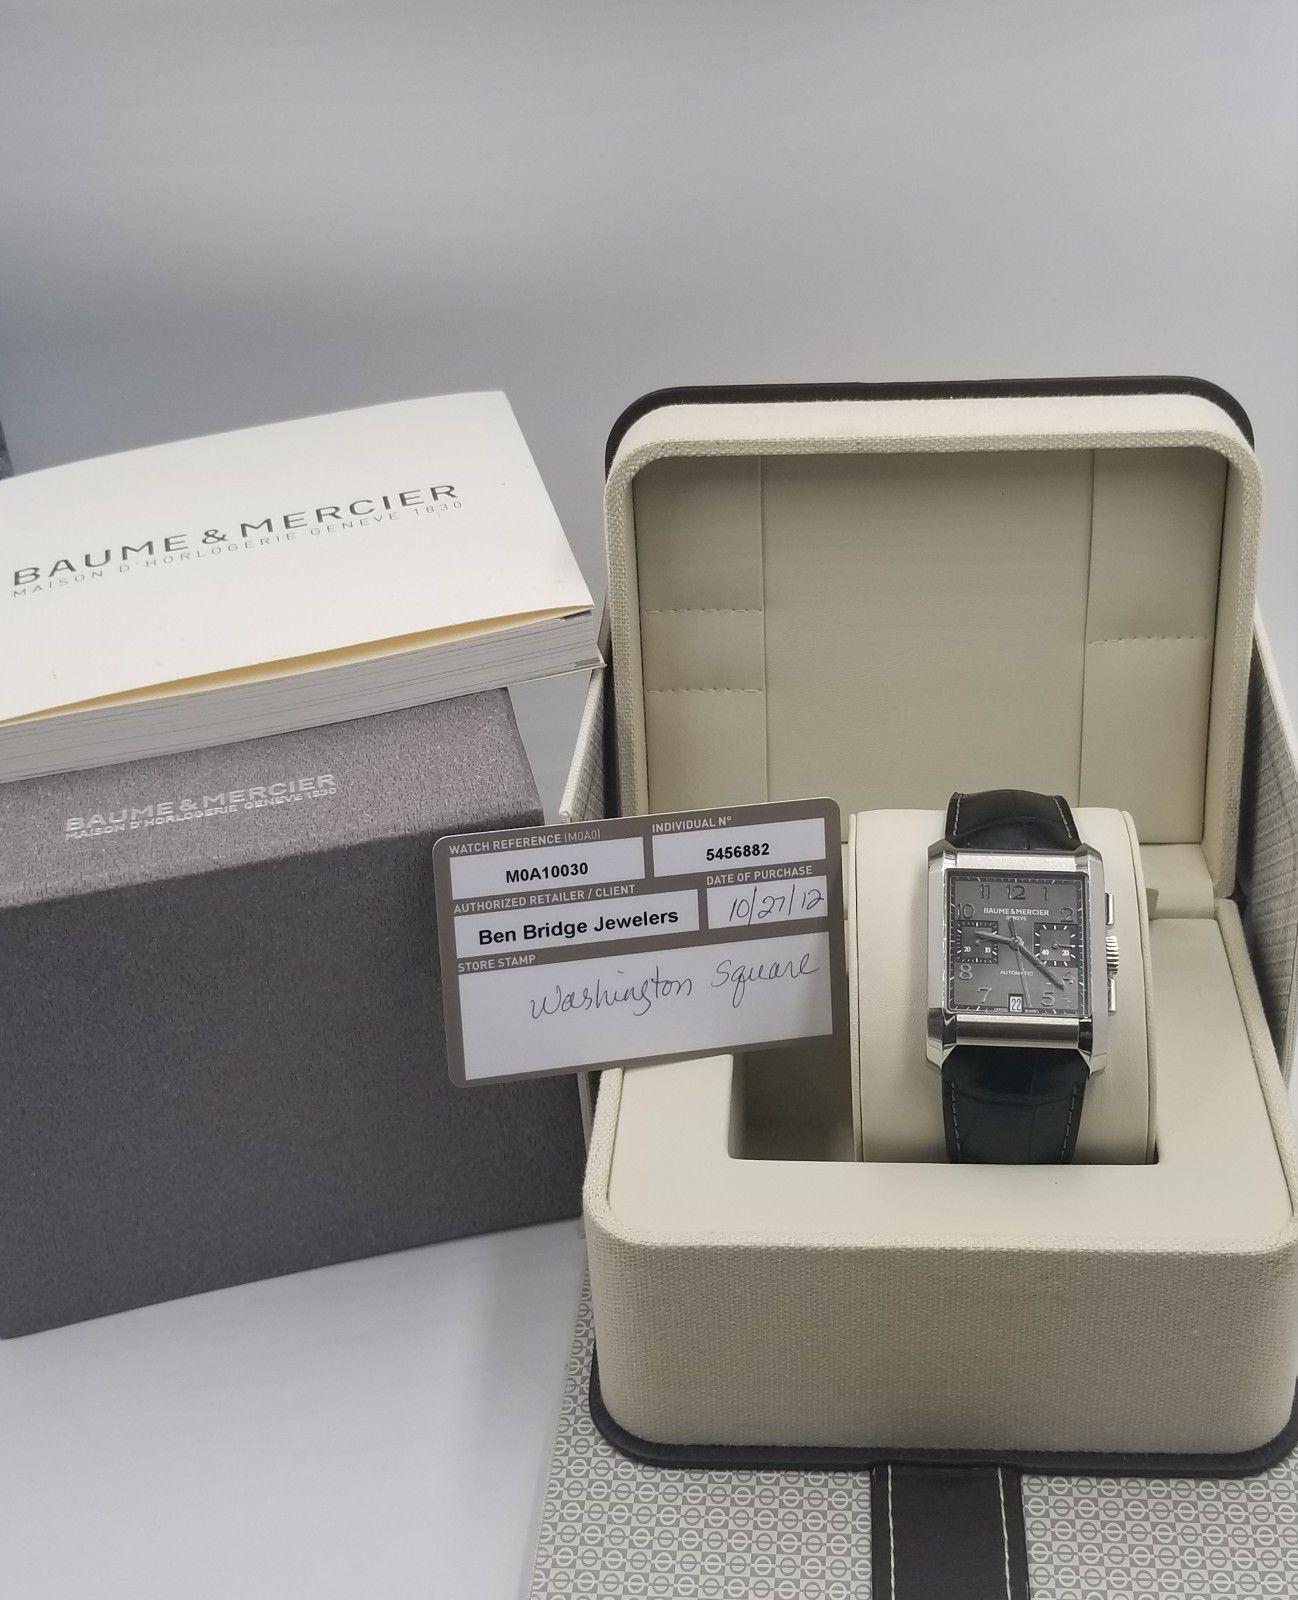 Baume & Mercier

Style Number: 10030 

Serial: 5456***

Year: Original Purchase Date October 2012

Model: Hampton Rectangular Collection

Case: Stainless Steel 

Band: Black Leather

Bezel: Stainless Steel

Dial: Dark Grey/Black

Face: Sapphire